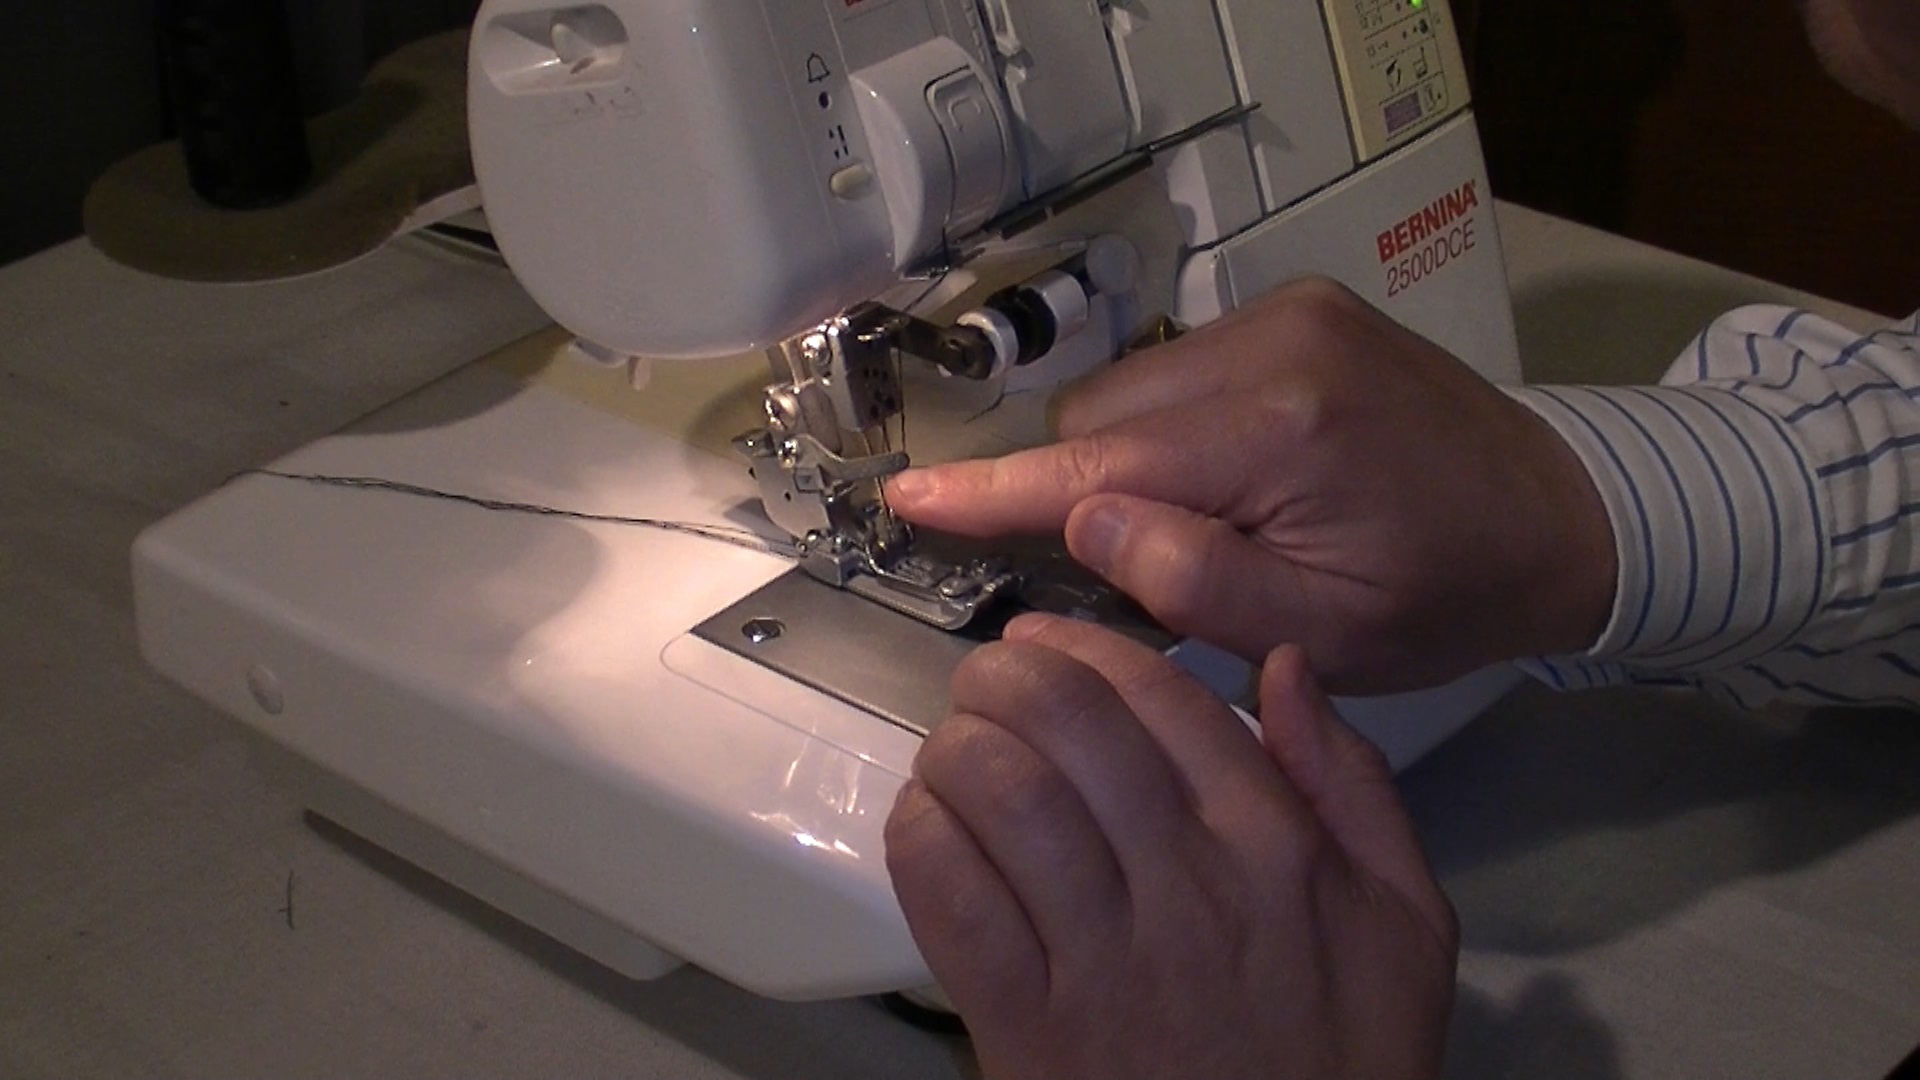 learn how to use an overlocker machine with the help of our online sewing classes that really do work. #onlinesewingclasses.